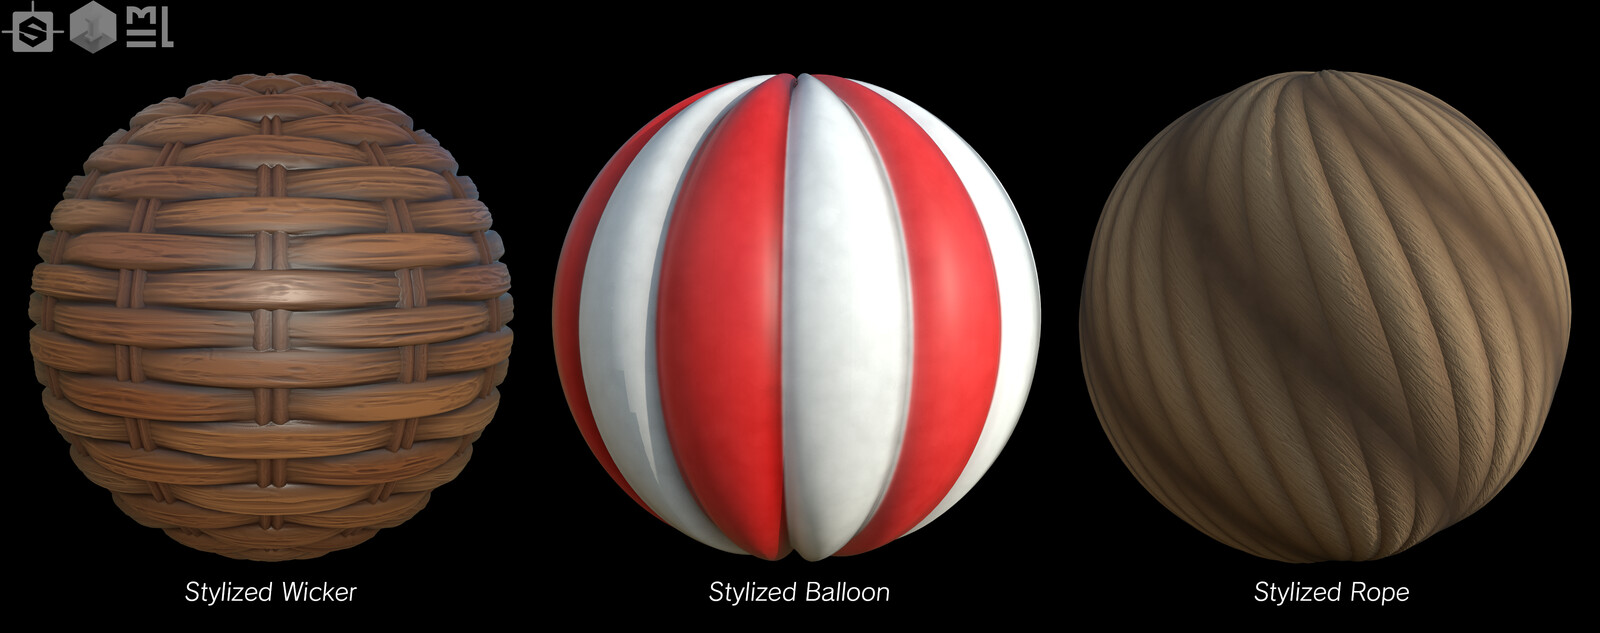 The three main materials I made for the project. As they were for a relatively static prop material-speaking, I didn't implement any sort of controls. The style was slightly cartoon/stylized, which is why the proportions aren't exactly true-to-life.